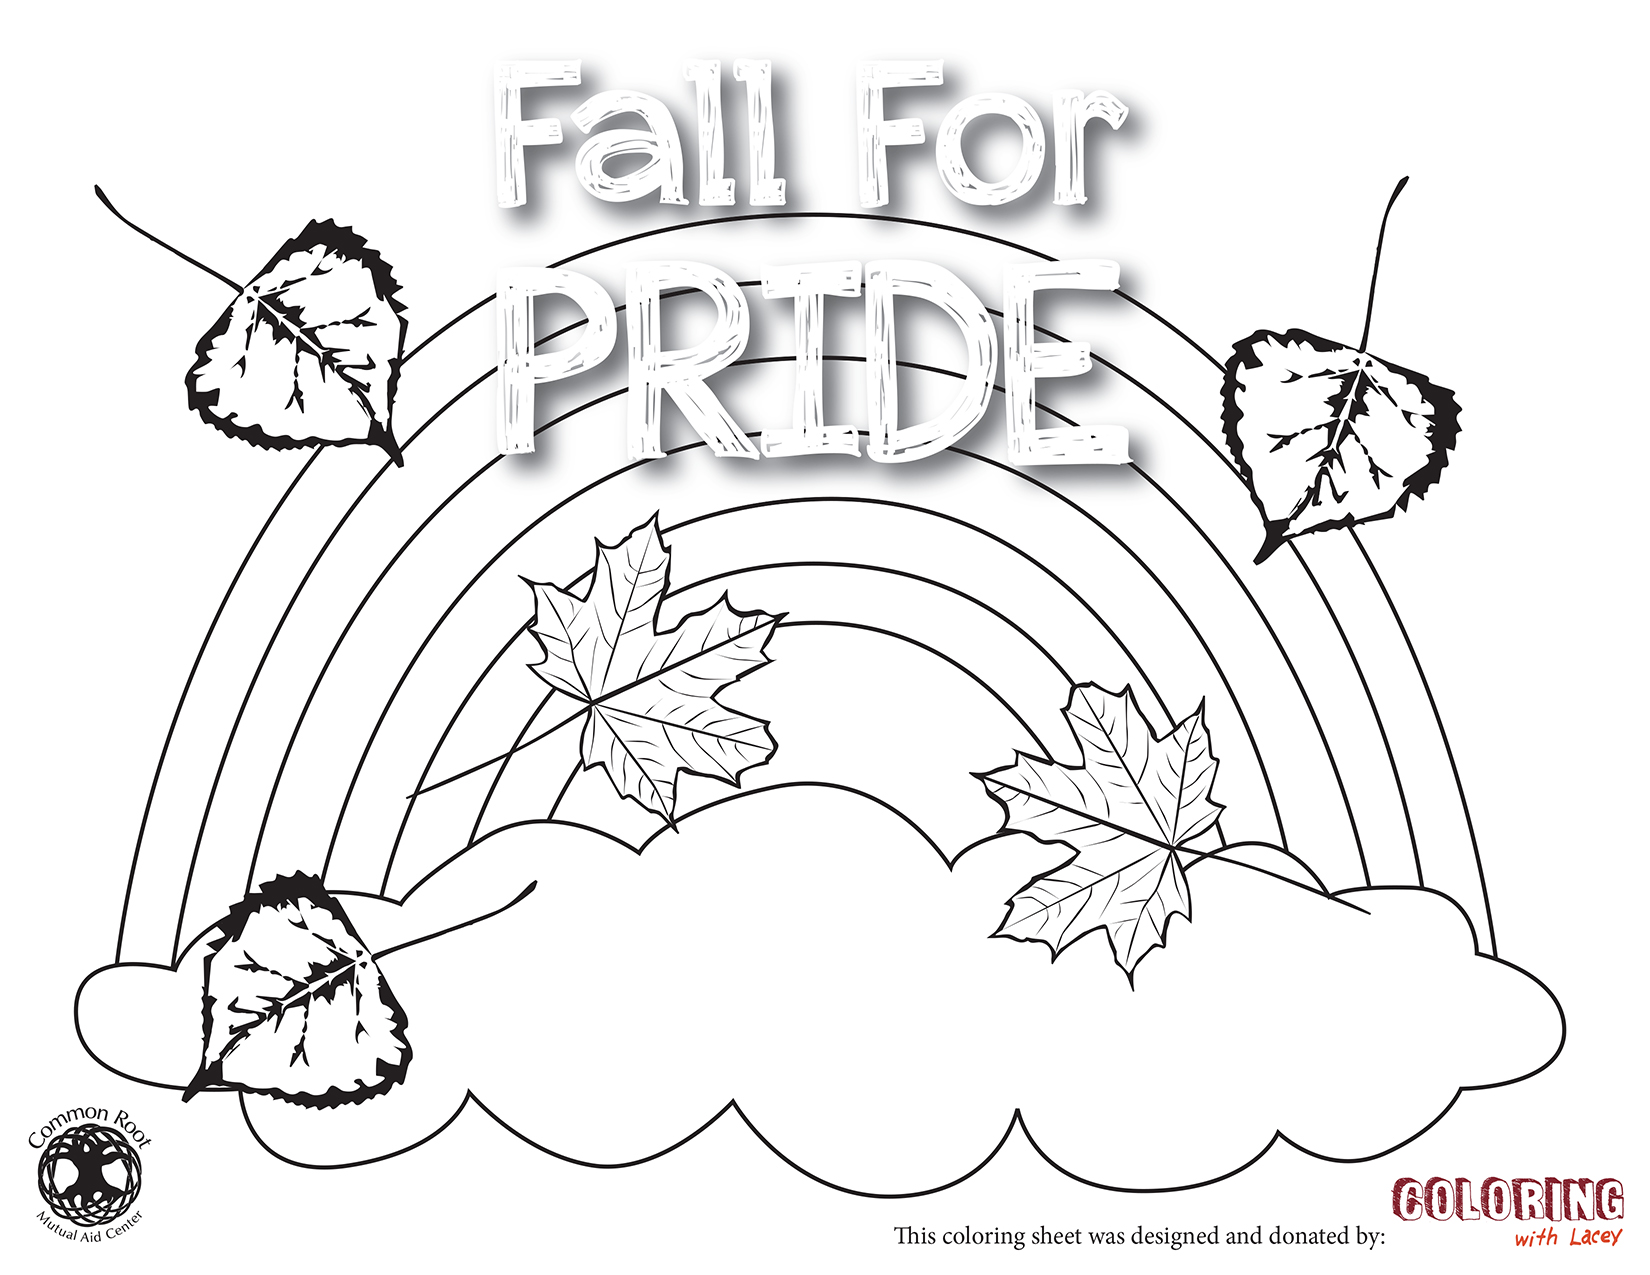 Fall for pride coloring sheet coloring with lacey